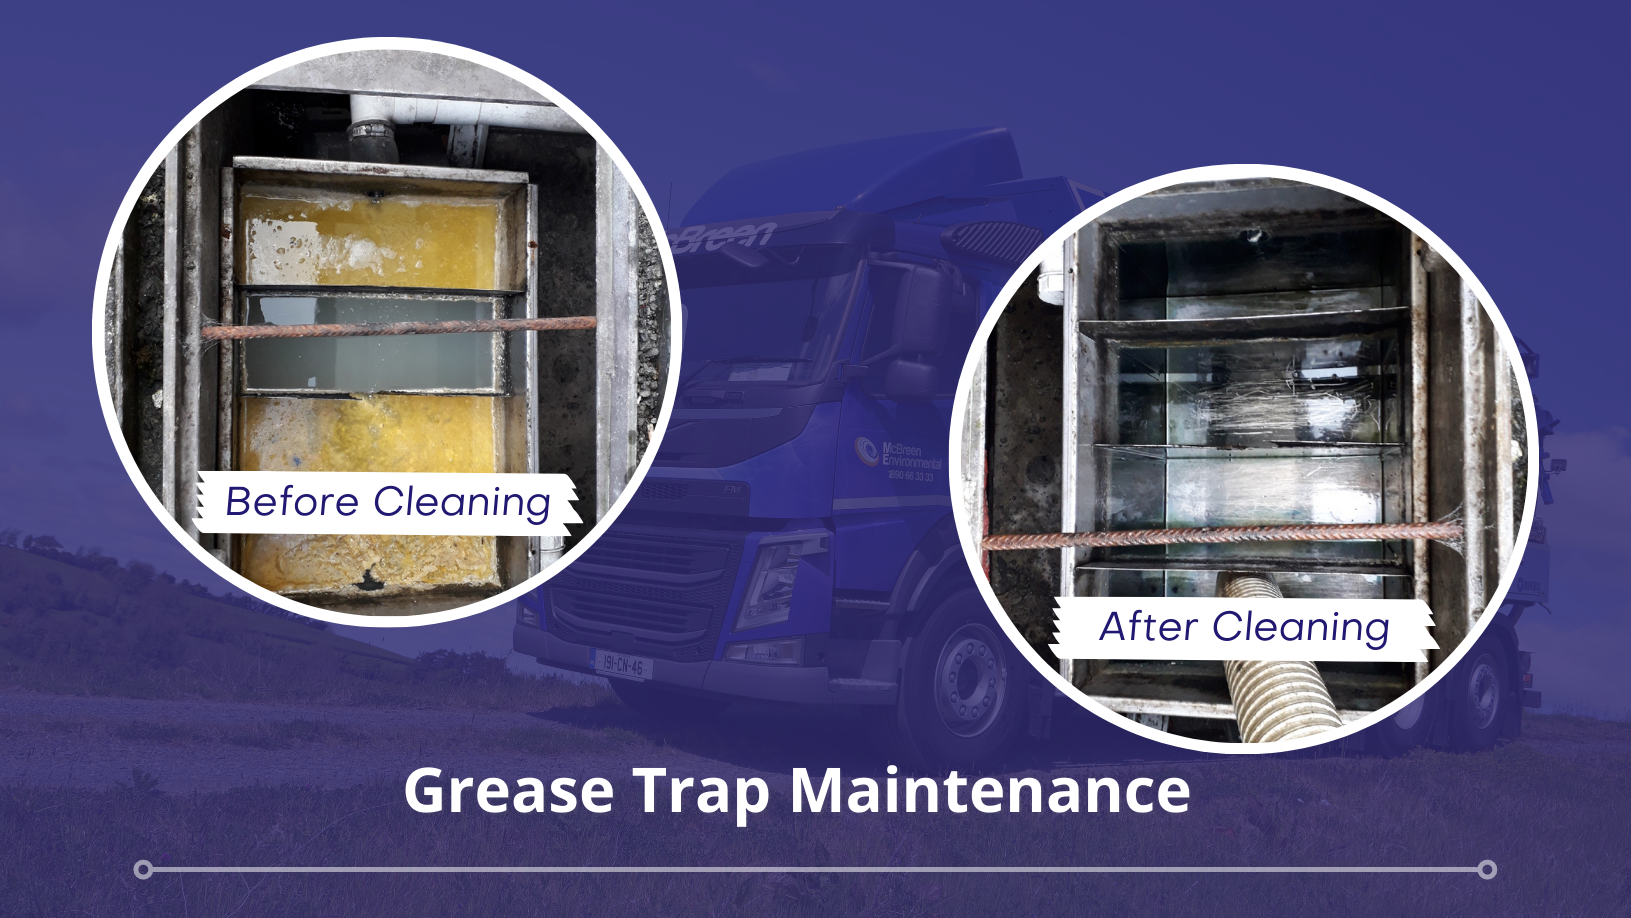 Grease trap before and after